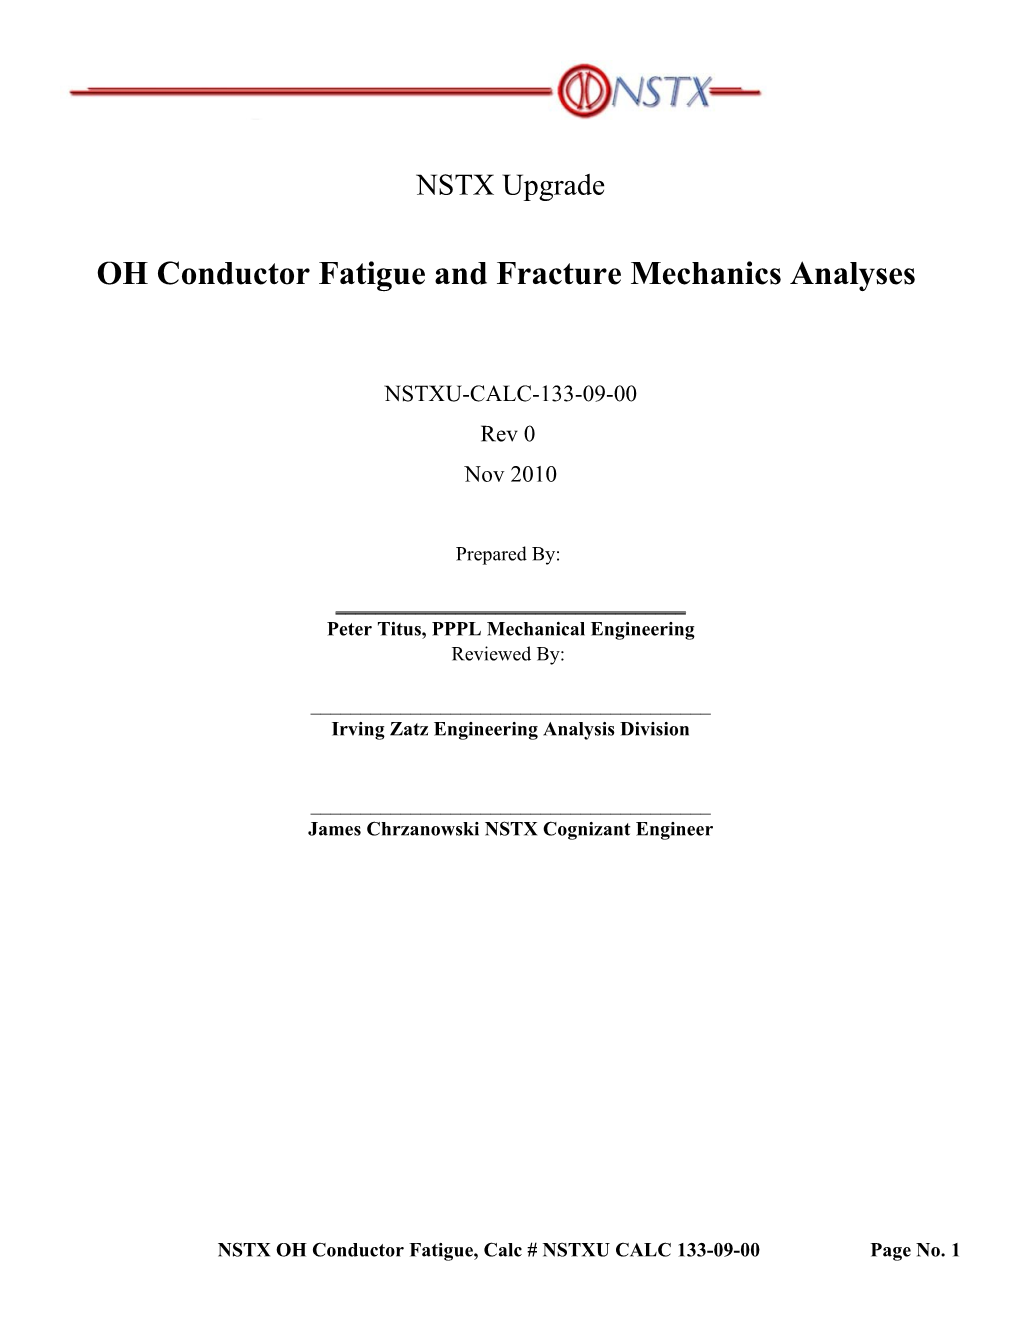 OH Conductor Fatigue and Fracture Mechanics Analyses